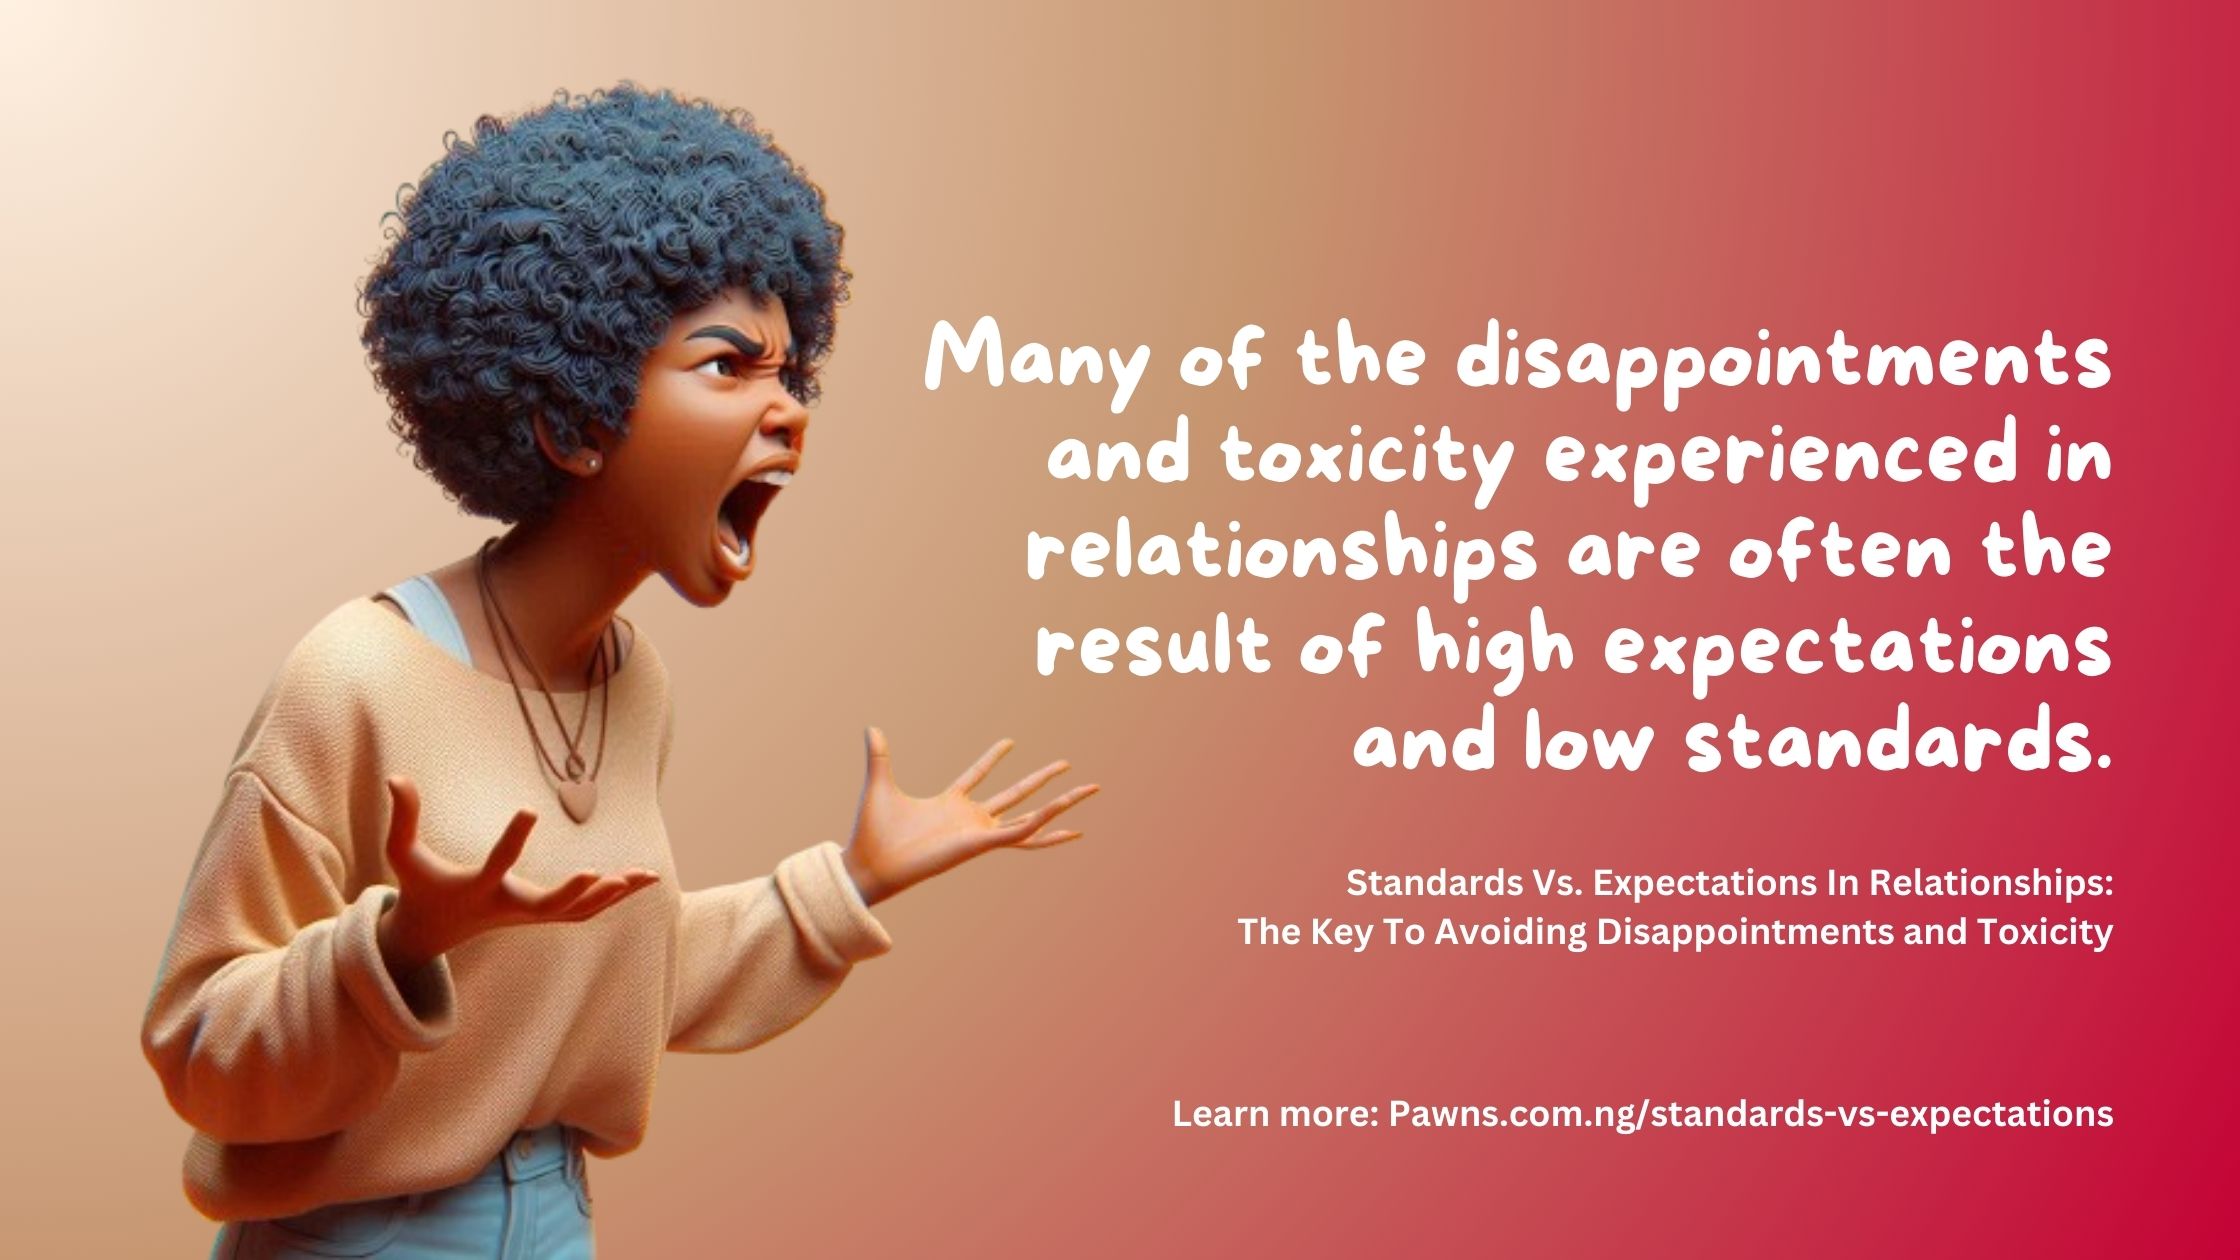 Many of the disappointments and toxicity experienced in relationships are often the result of high expectations and low standards. Standards Vs. Expectations In Relationships